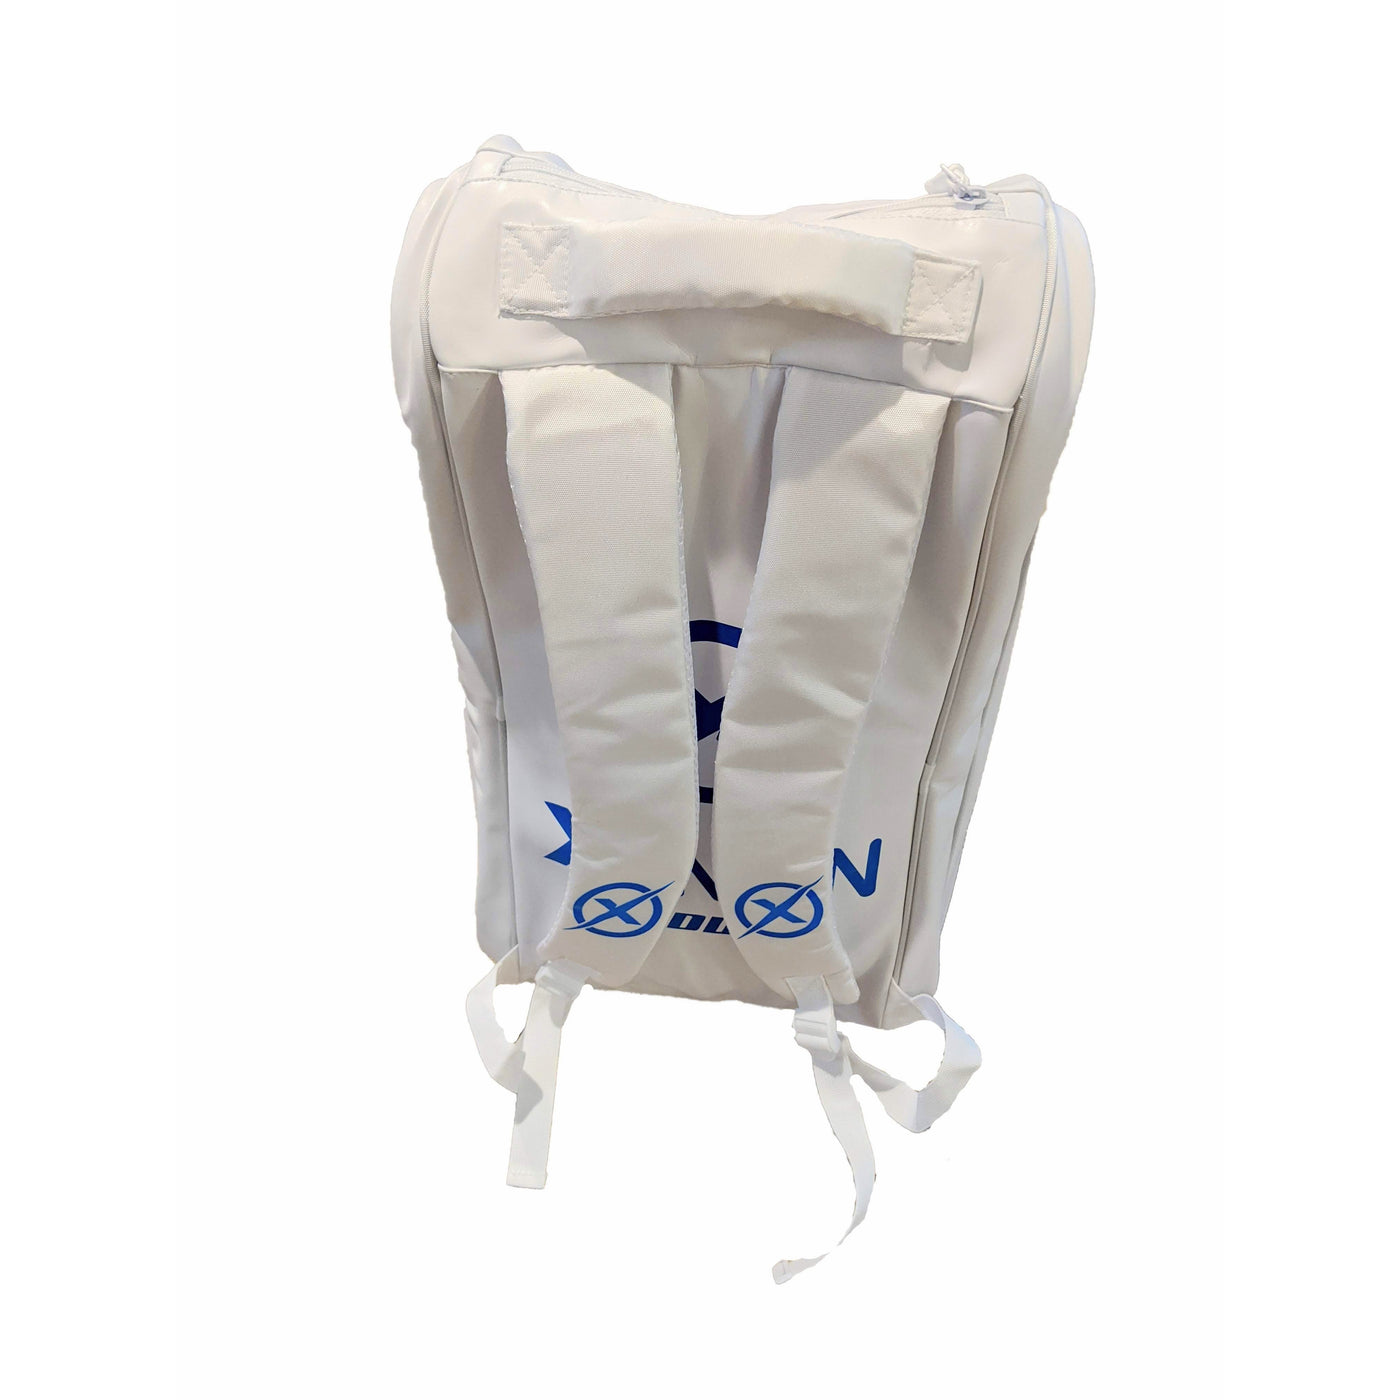 Xenon Paddle Tennis carry bag white backpack straps for easy carry